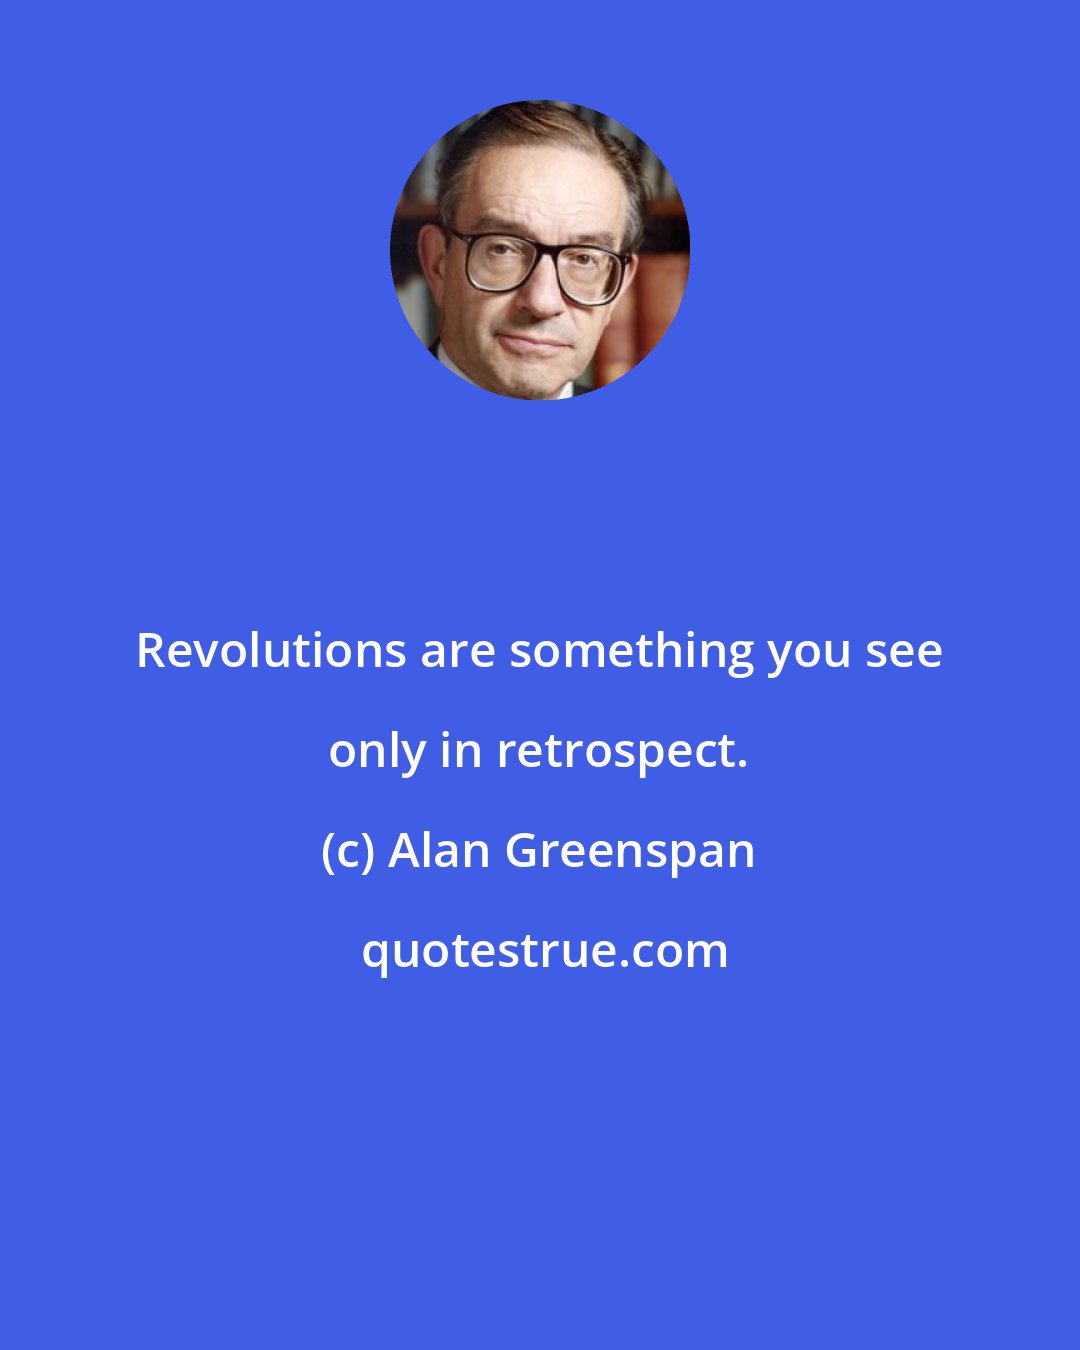 Alan Greenspan: Revolutions are something you see only in retrospect.